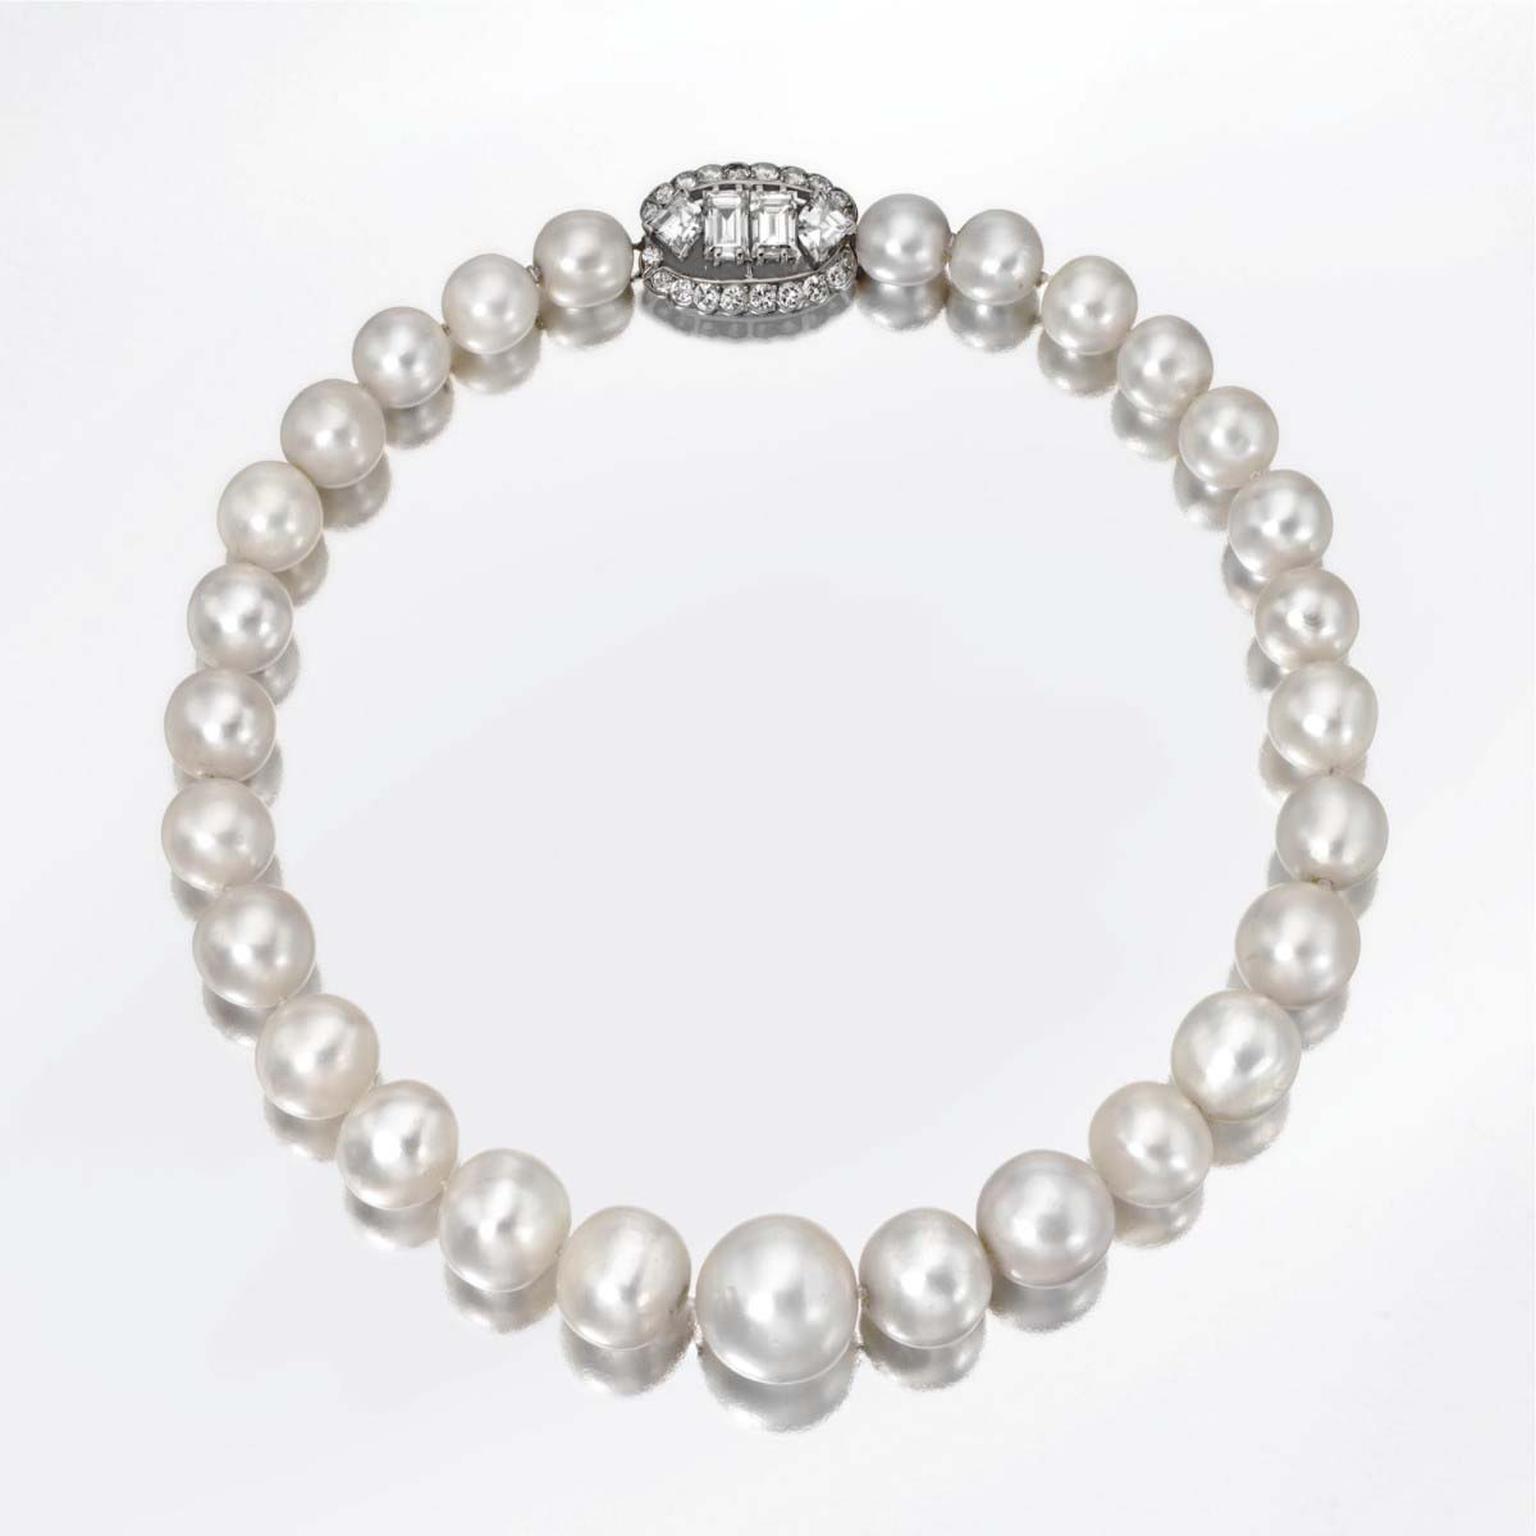 Duchess of Windsor pearl necklace 